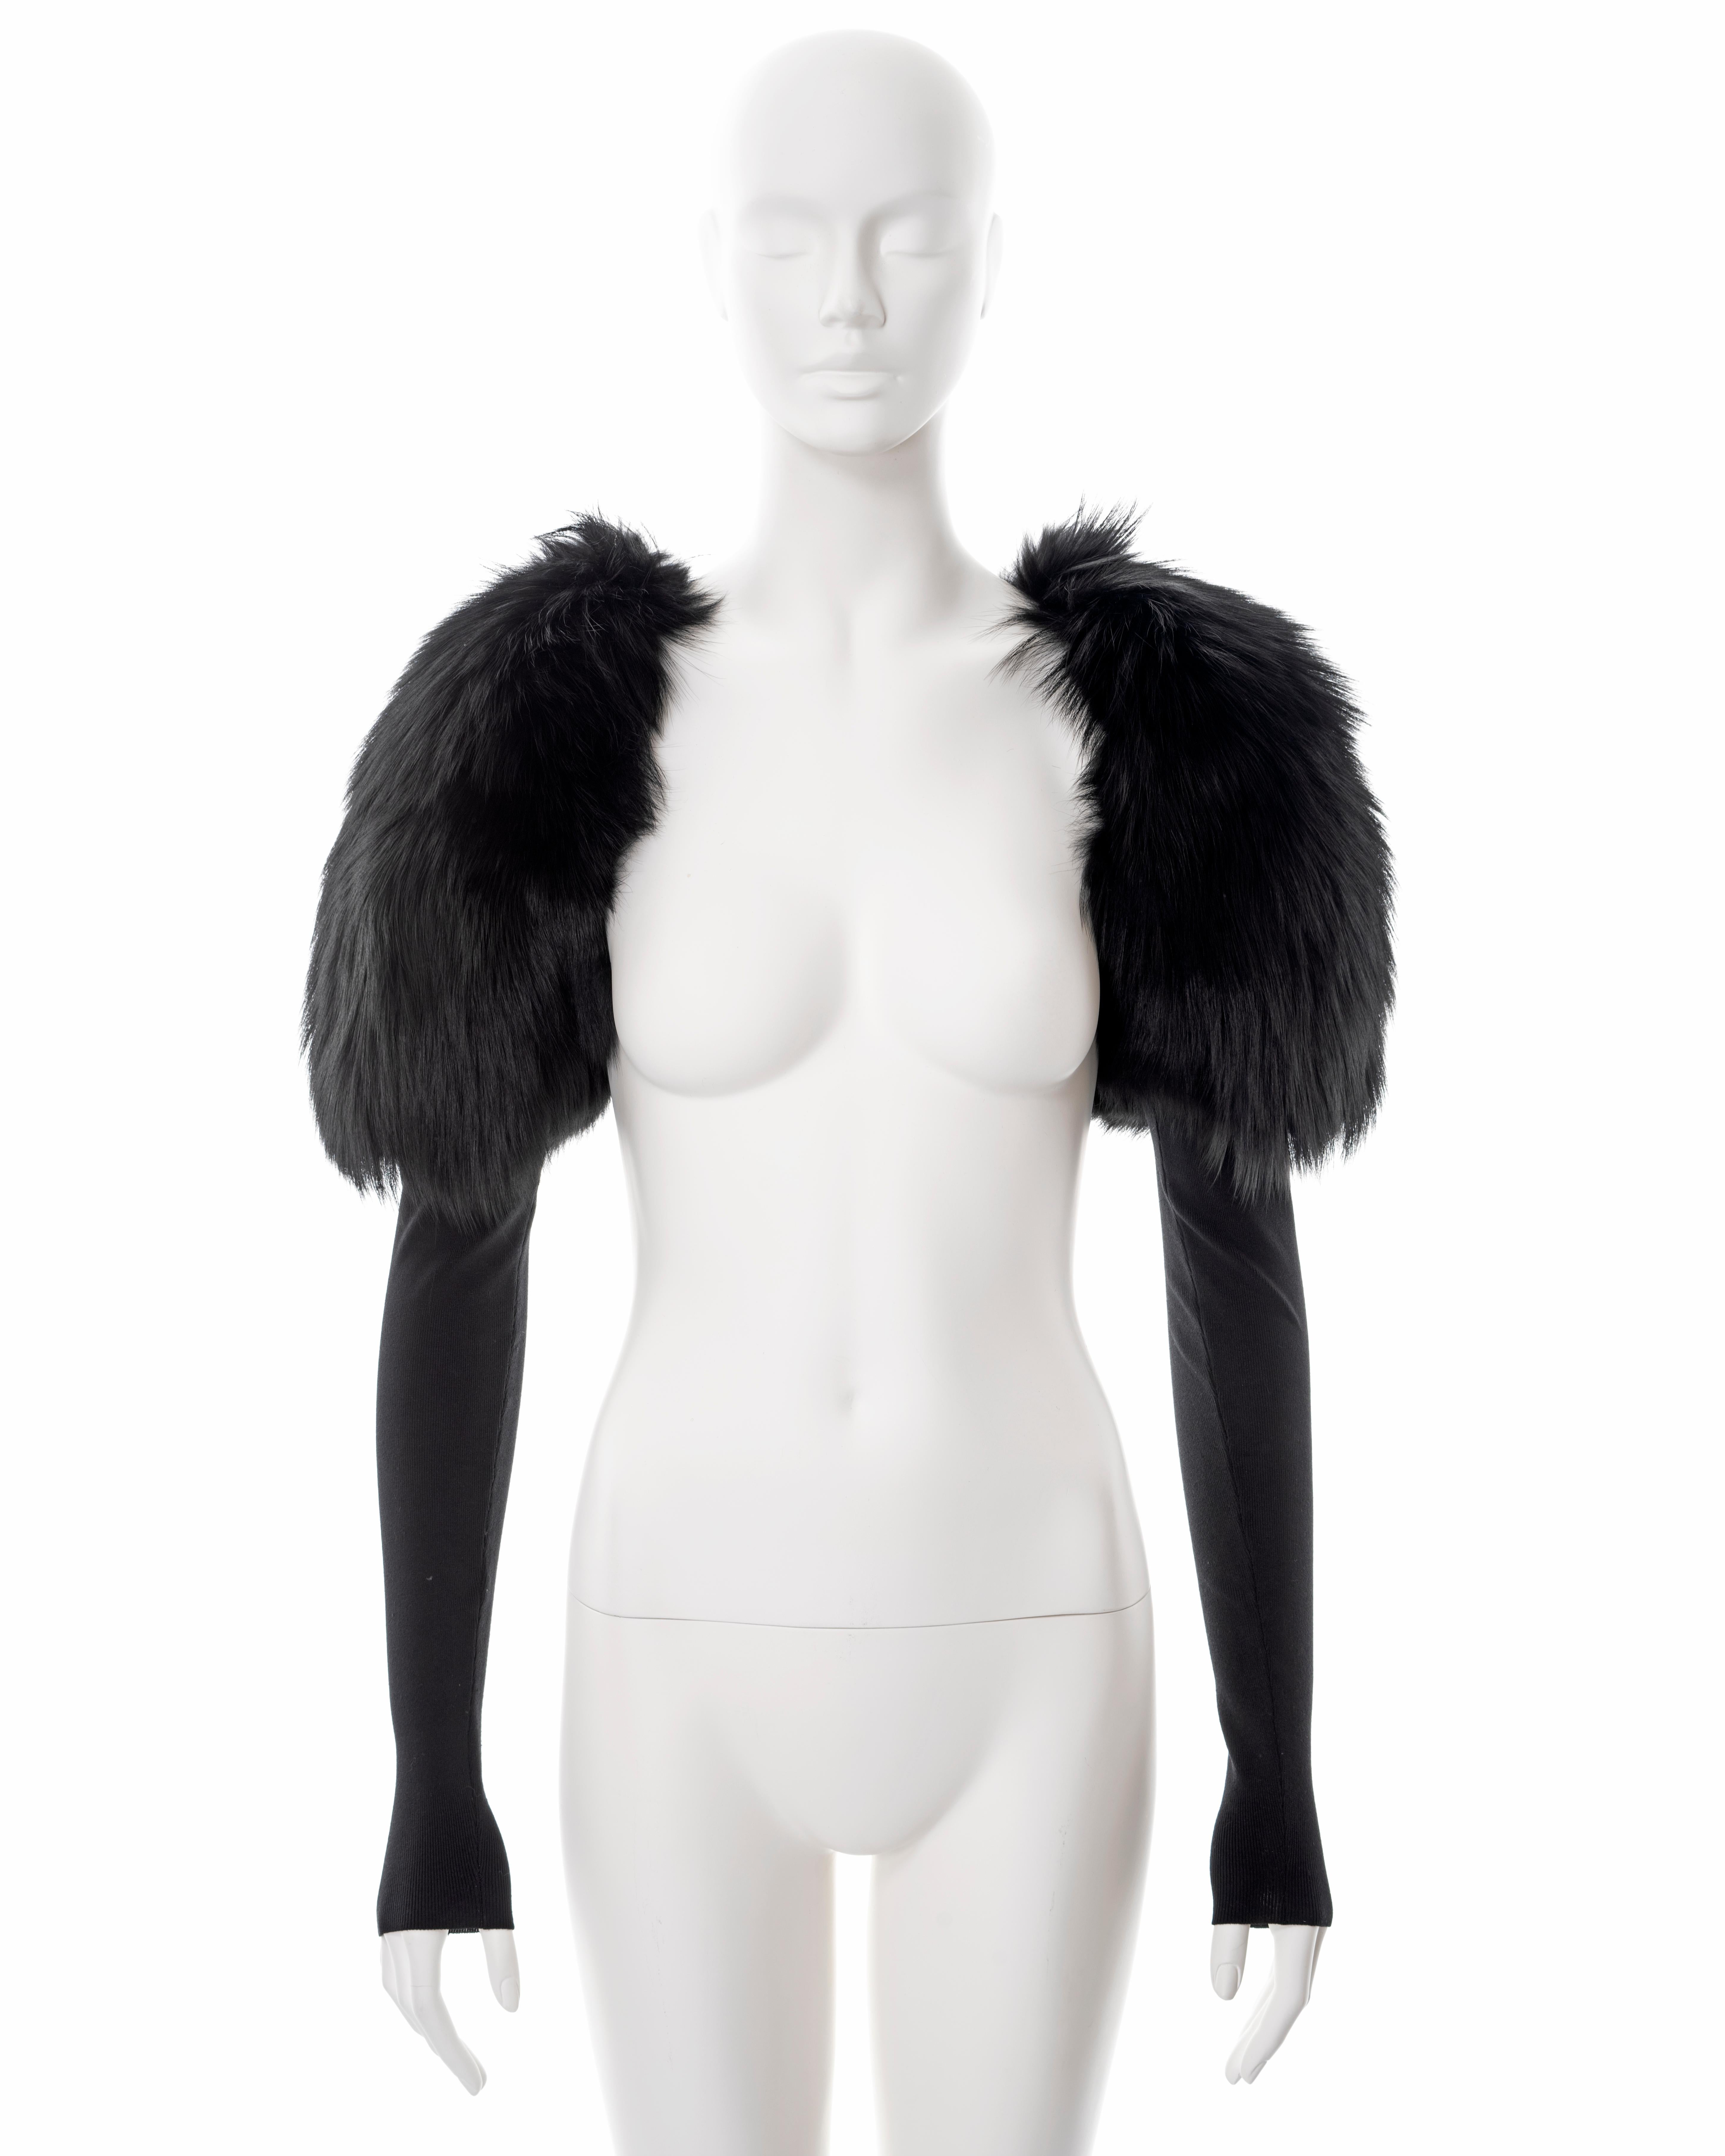 ▪ Gucci shrug 
▪ Designed by Tom Ford
▪ Sold by One of a Kind Archive
▪ Black fox fur shoulders 
▪ Long fitted silk-nylon jersey sleeves 
▪ Size Small
▪ Made in Italy

All photographs in this listing EXCLUDING any reference or runway imagery needs